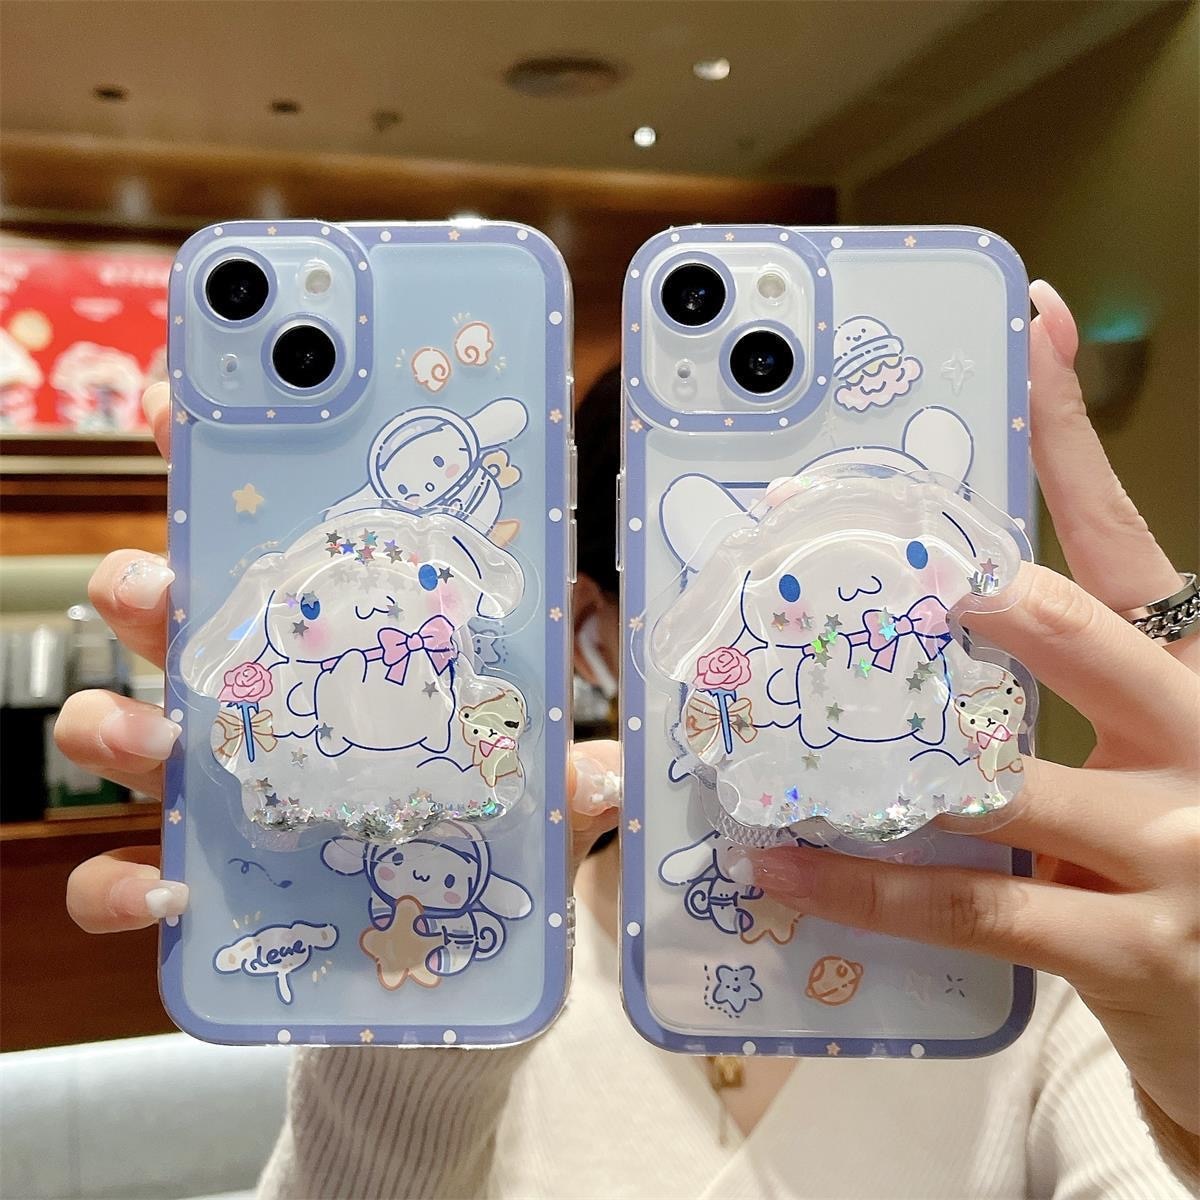 Kawaii Japanese anime illustration Phone Cases For iphone 11 Pro XS Max XR  X Case silicone Cover For iPhone 6 6s 7 8 7Plus Capa - Price history &  Review | AliExpress Seller - Candyguoguo Store | Alitools.io